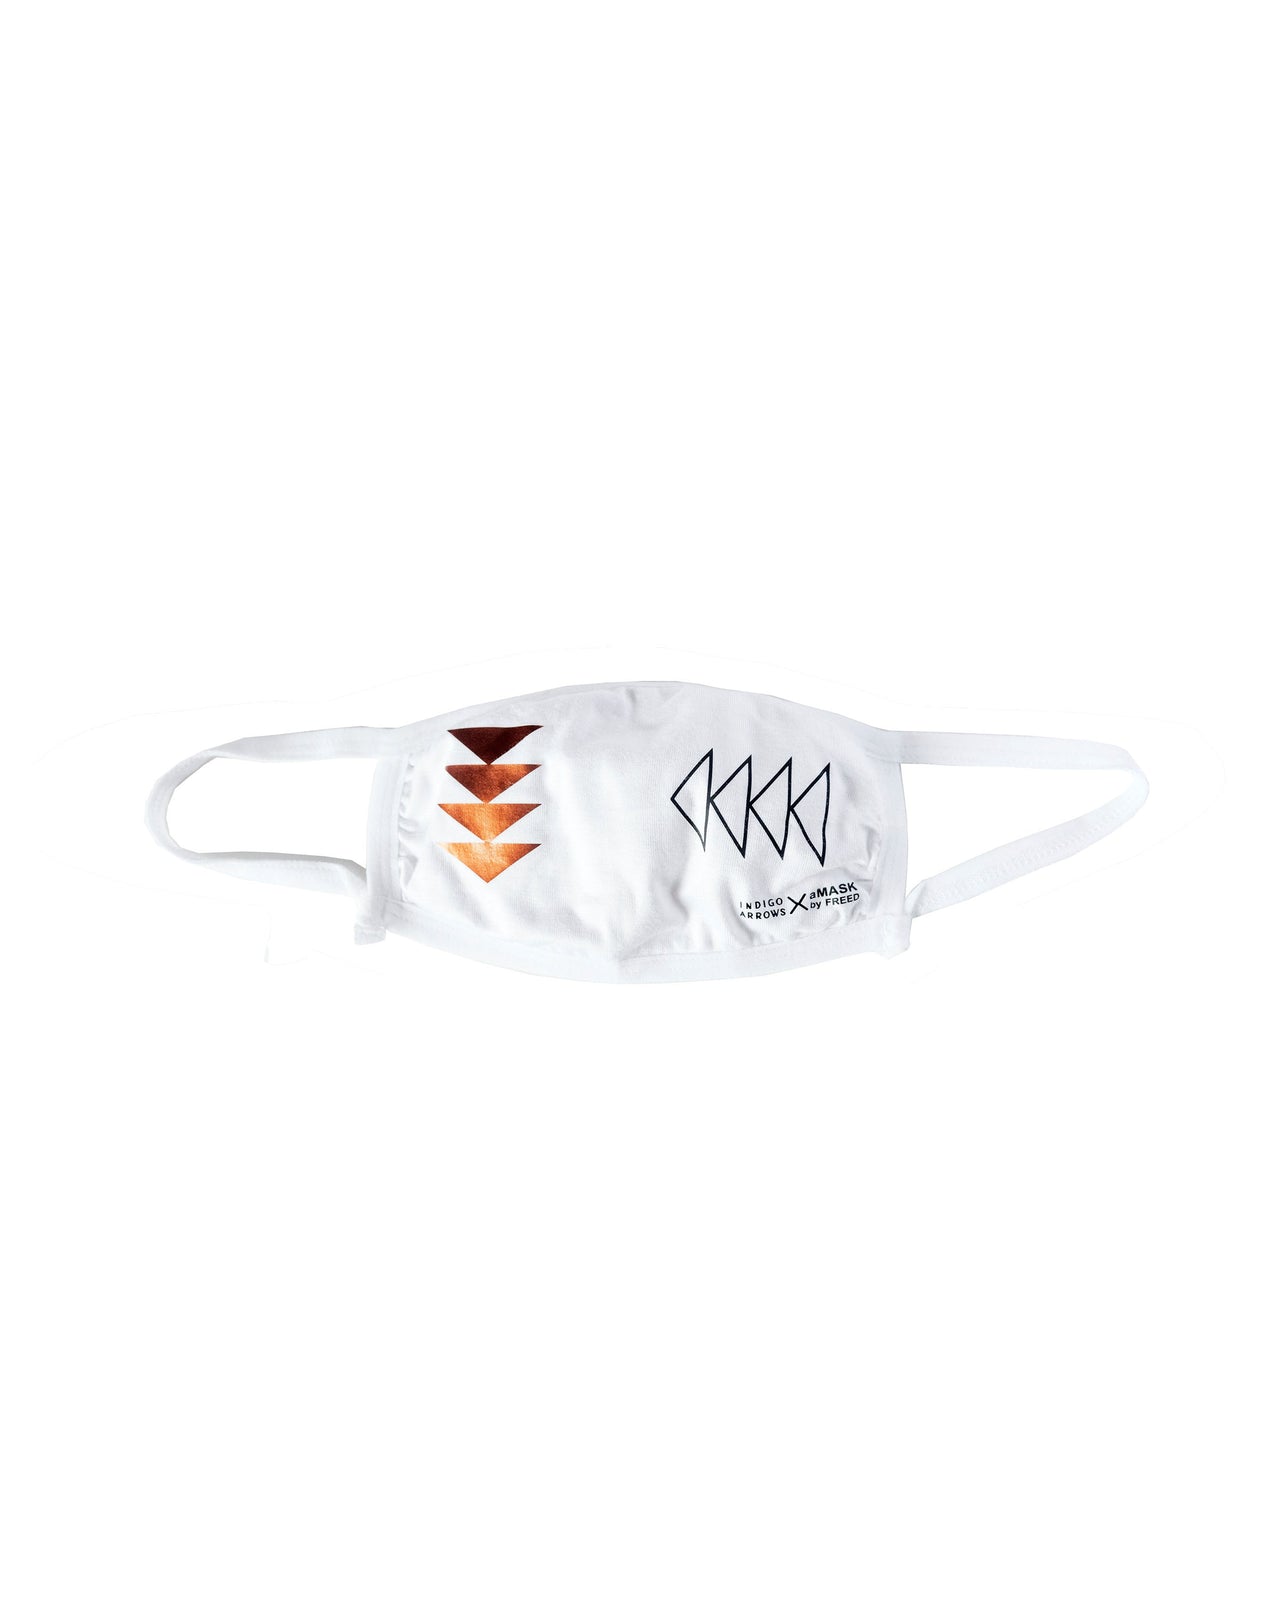 Made in Canada white adult breathable face mask with Indigenous design.